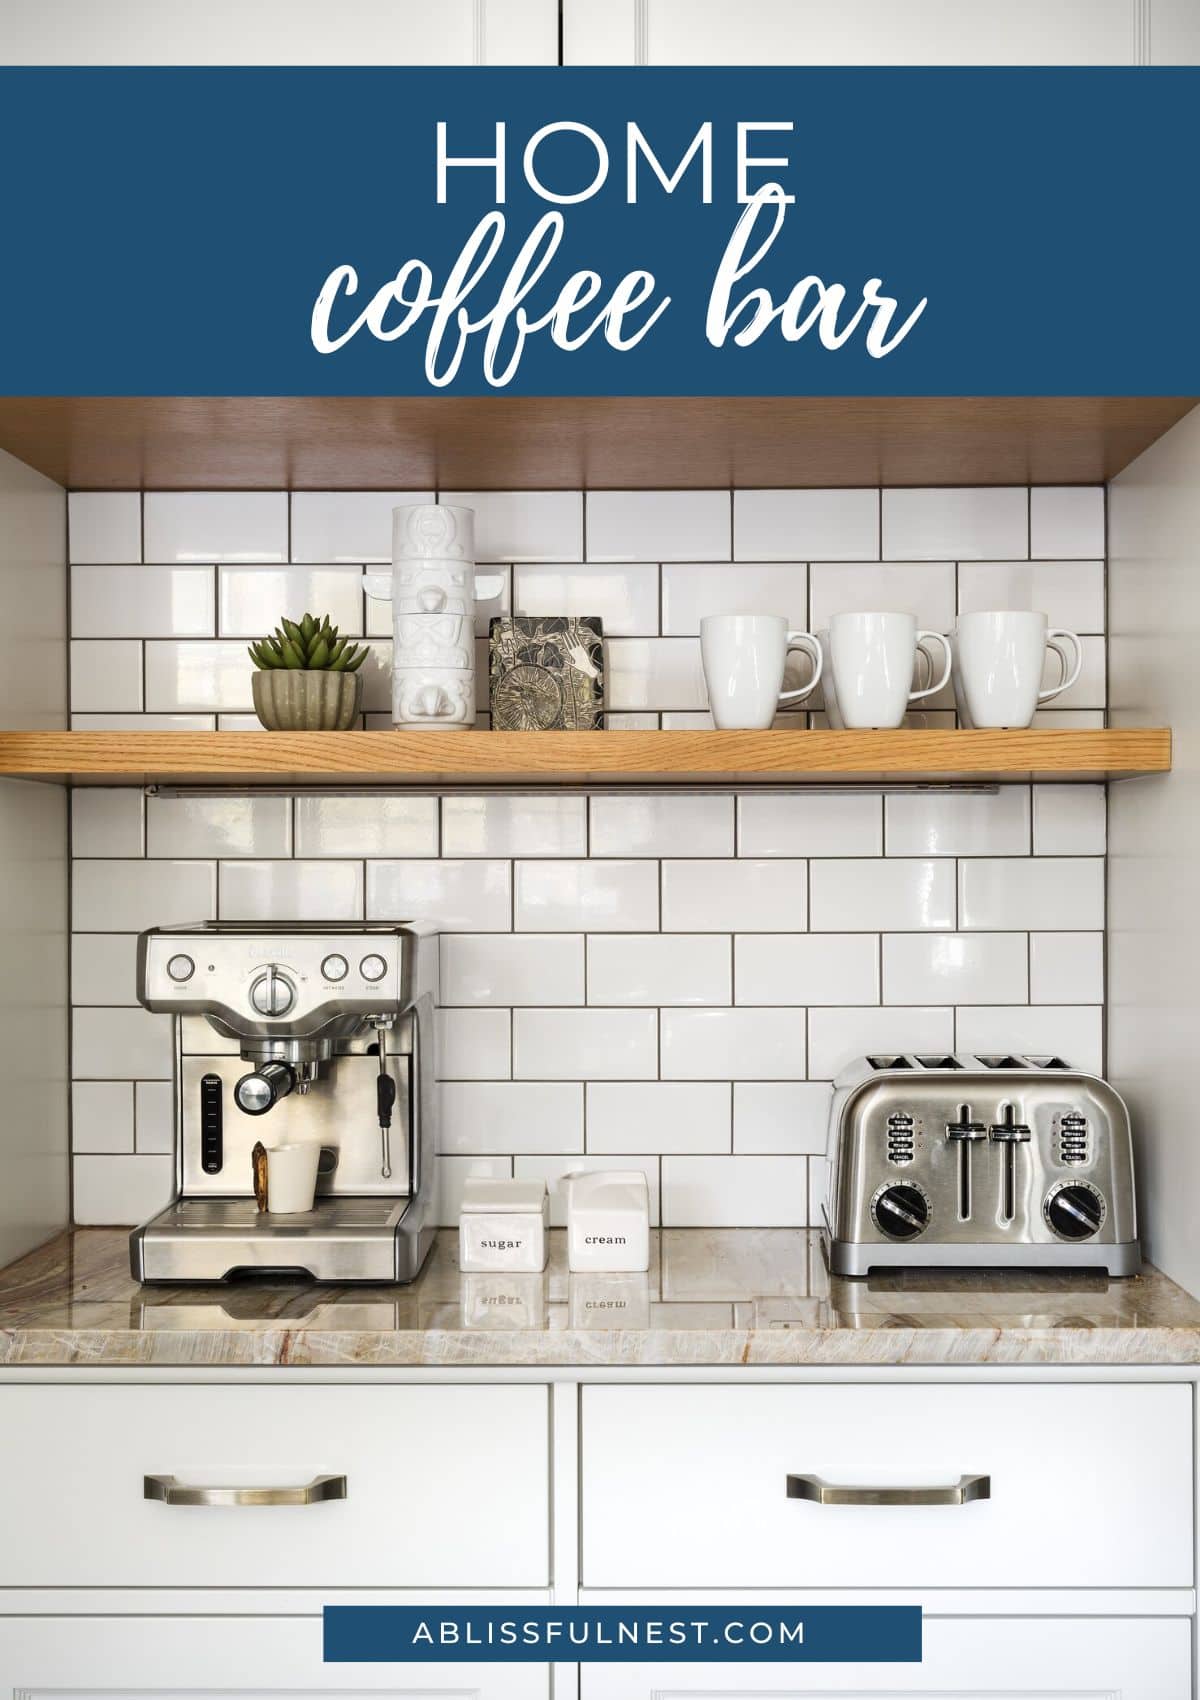 subway tile with black grout and cream colored counters with a toaster and an espresso machine